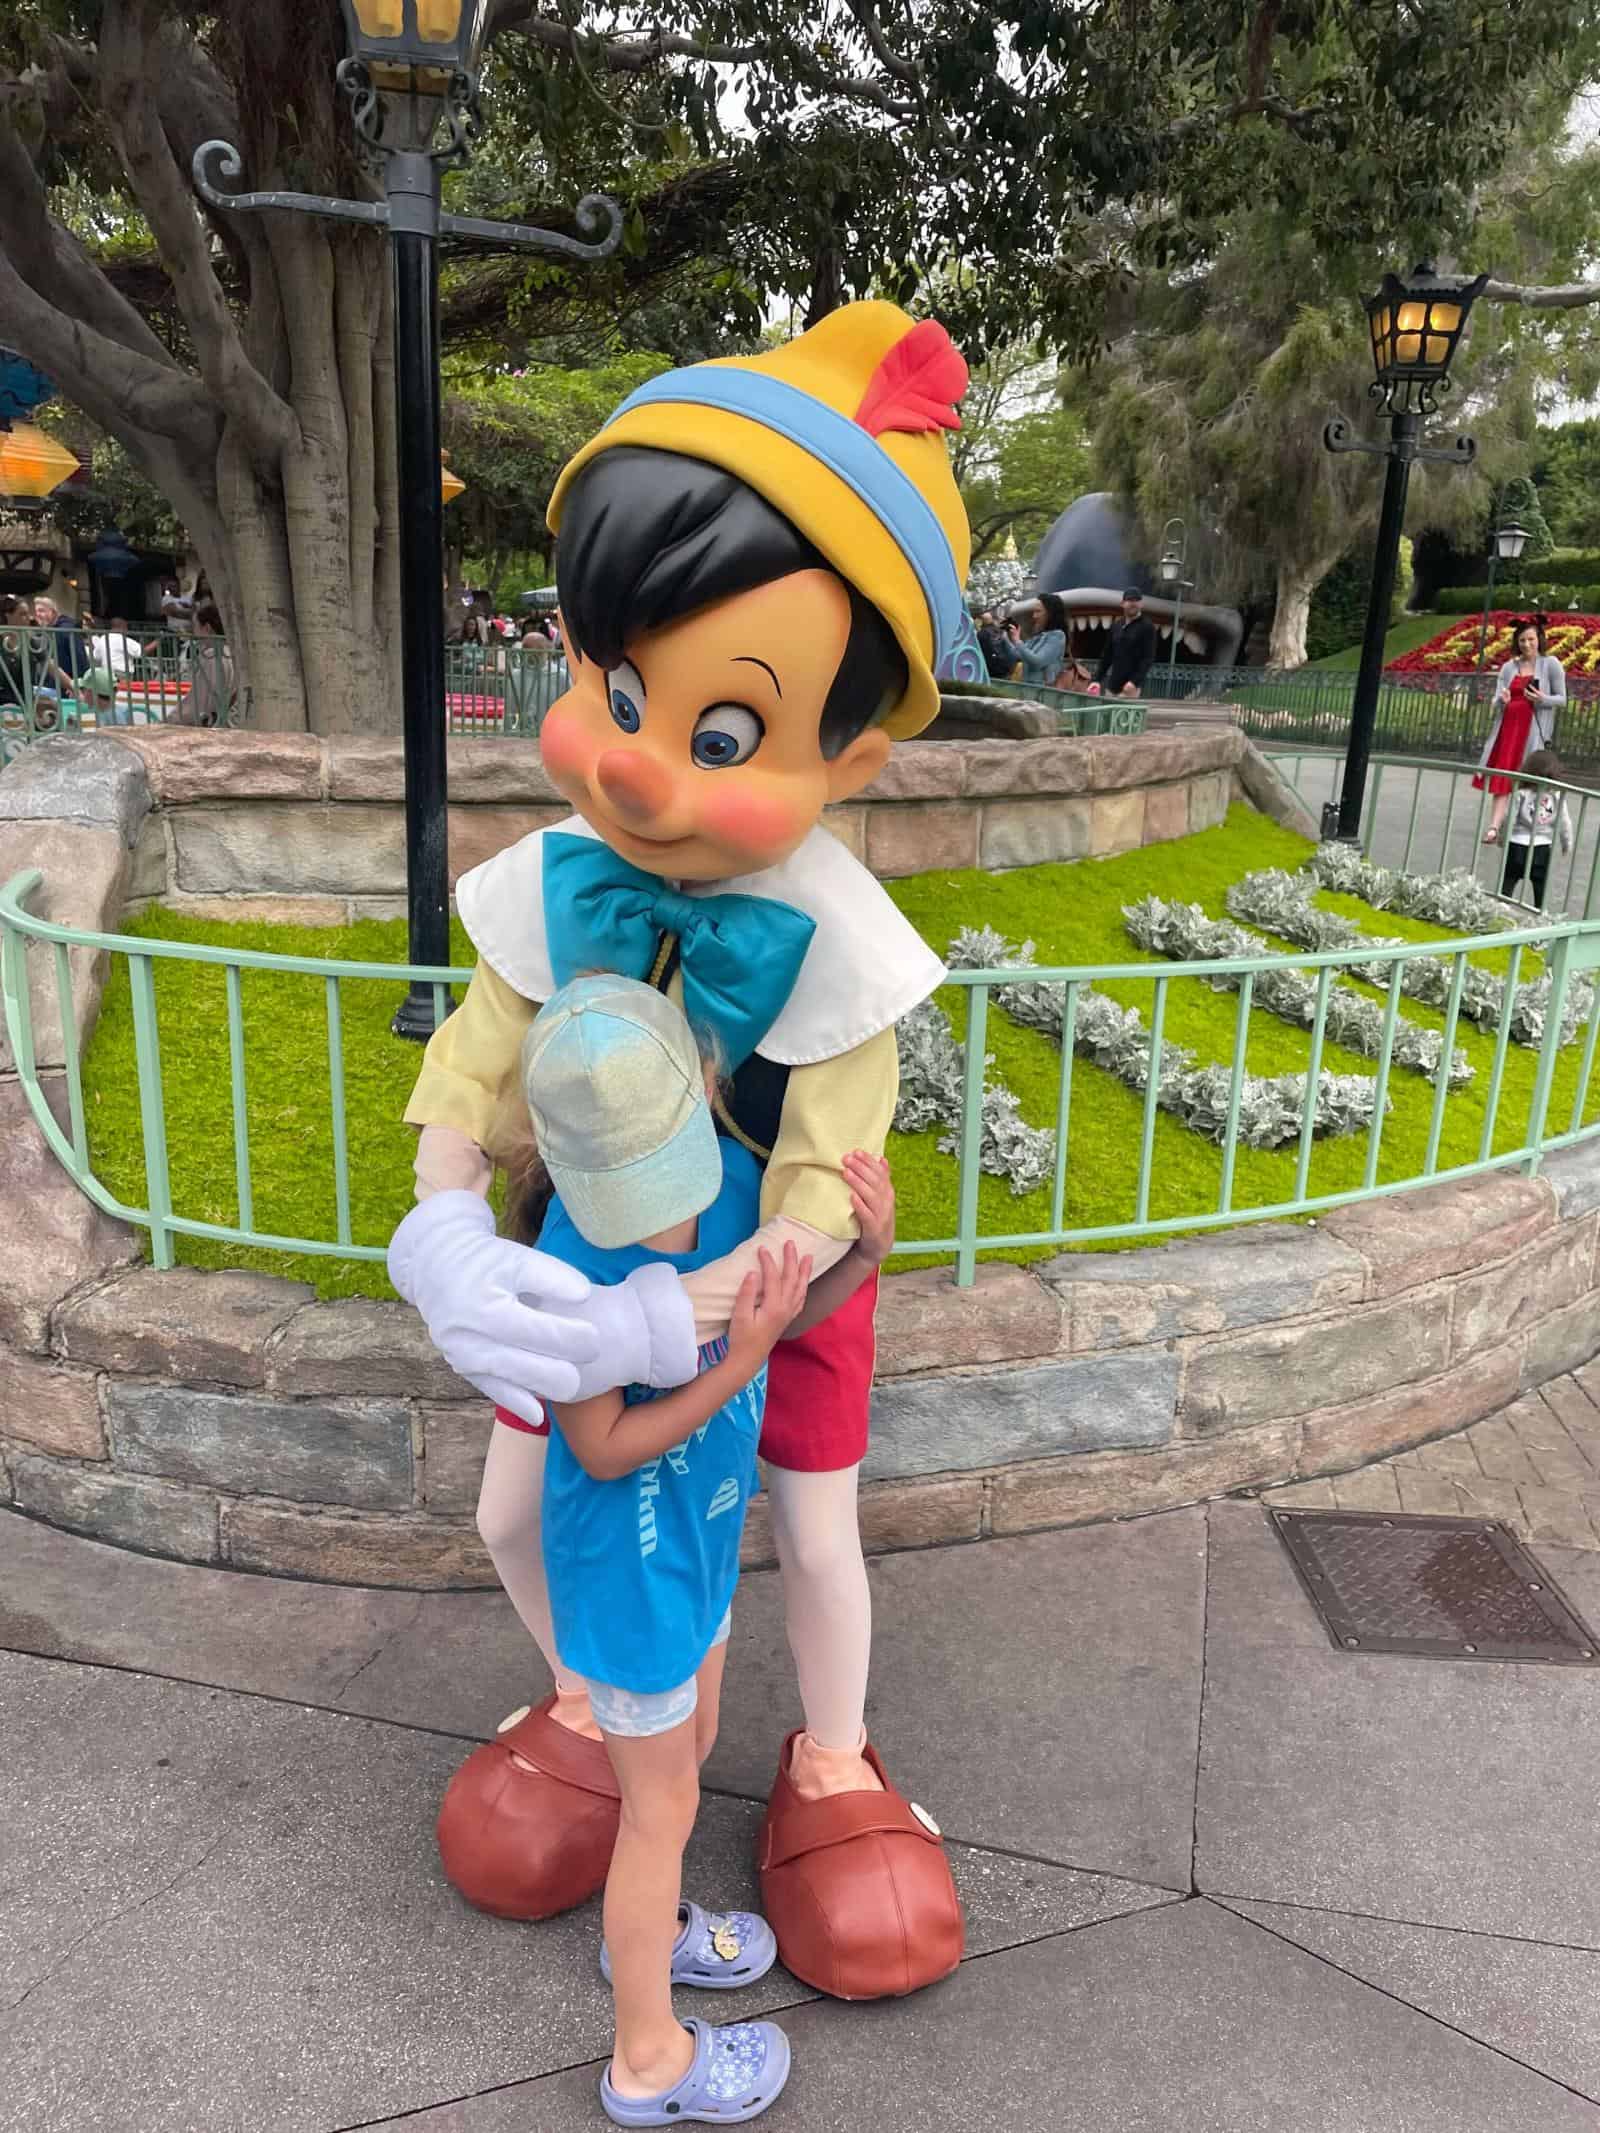 Where to meet characters at Disneyland with toddlers